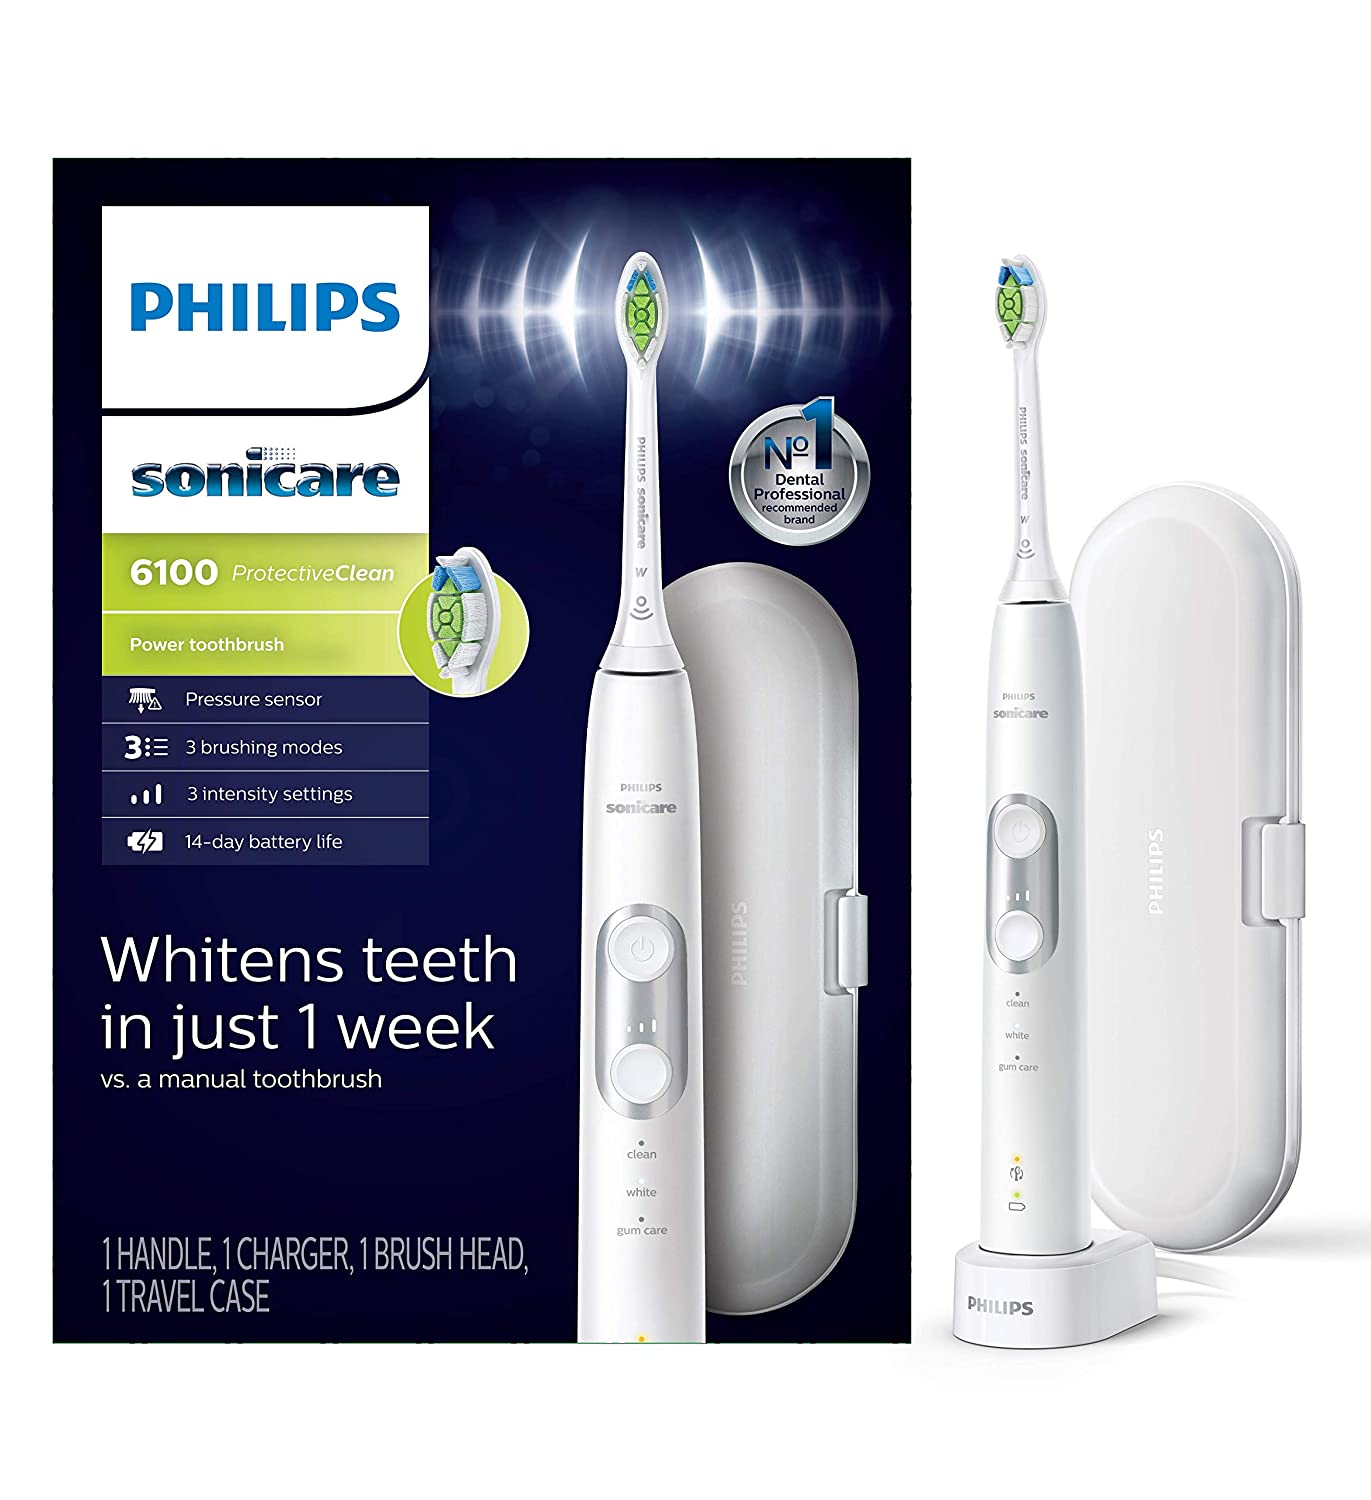 Philips Sonicare ProtectiveClean 6100 Rechargeable Electric Power Toothbrush (HX6877/21, White) $78 + Free Shipping